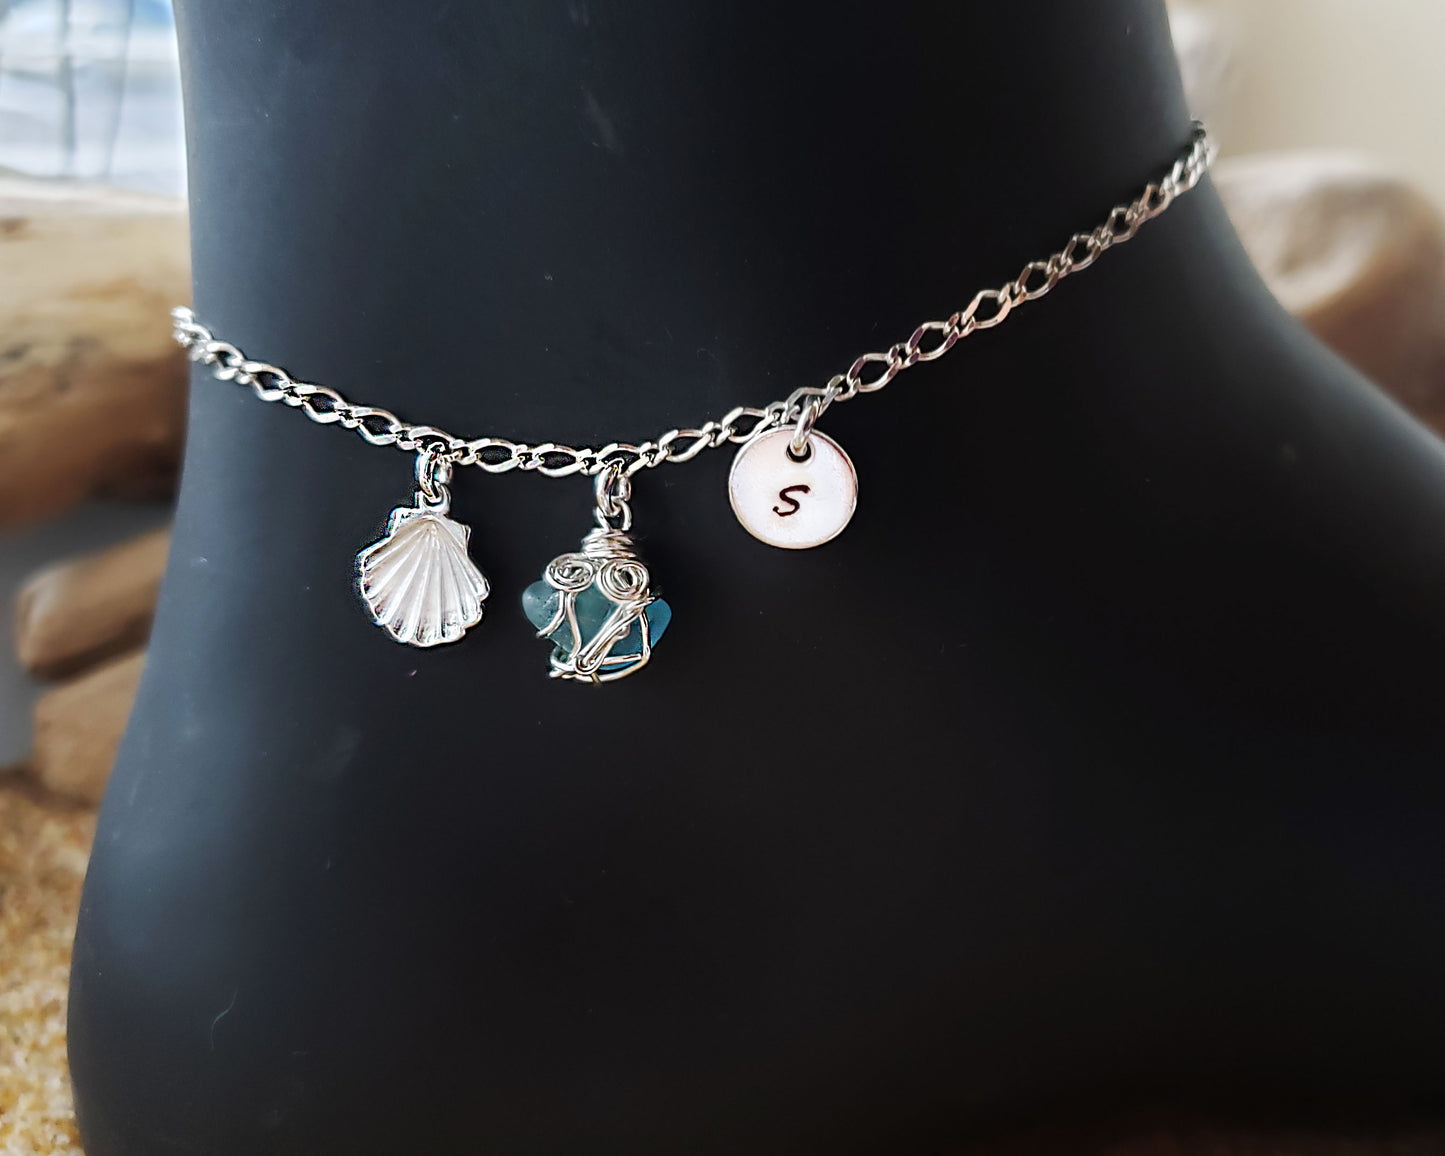 Deluxe Personalized Aqua Blue Beach Glass, Sea Shell, Infinity, Initial Ankle Bracelet-Anklet